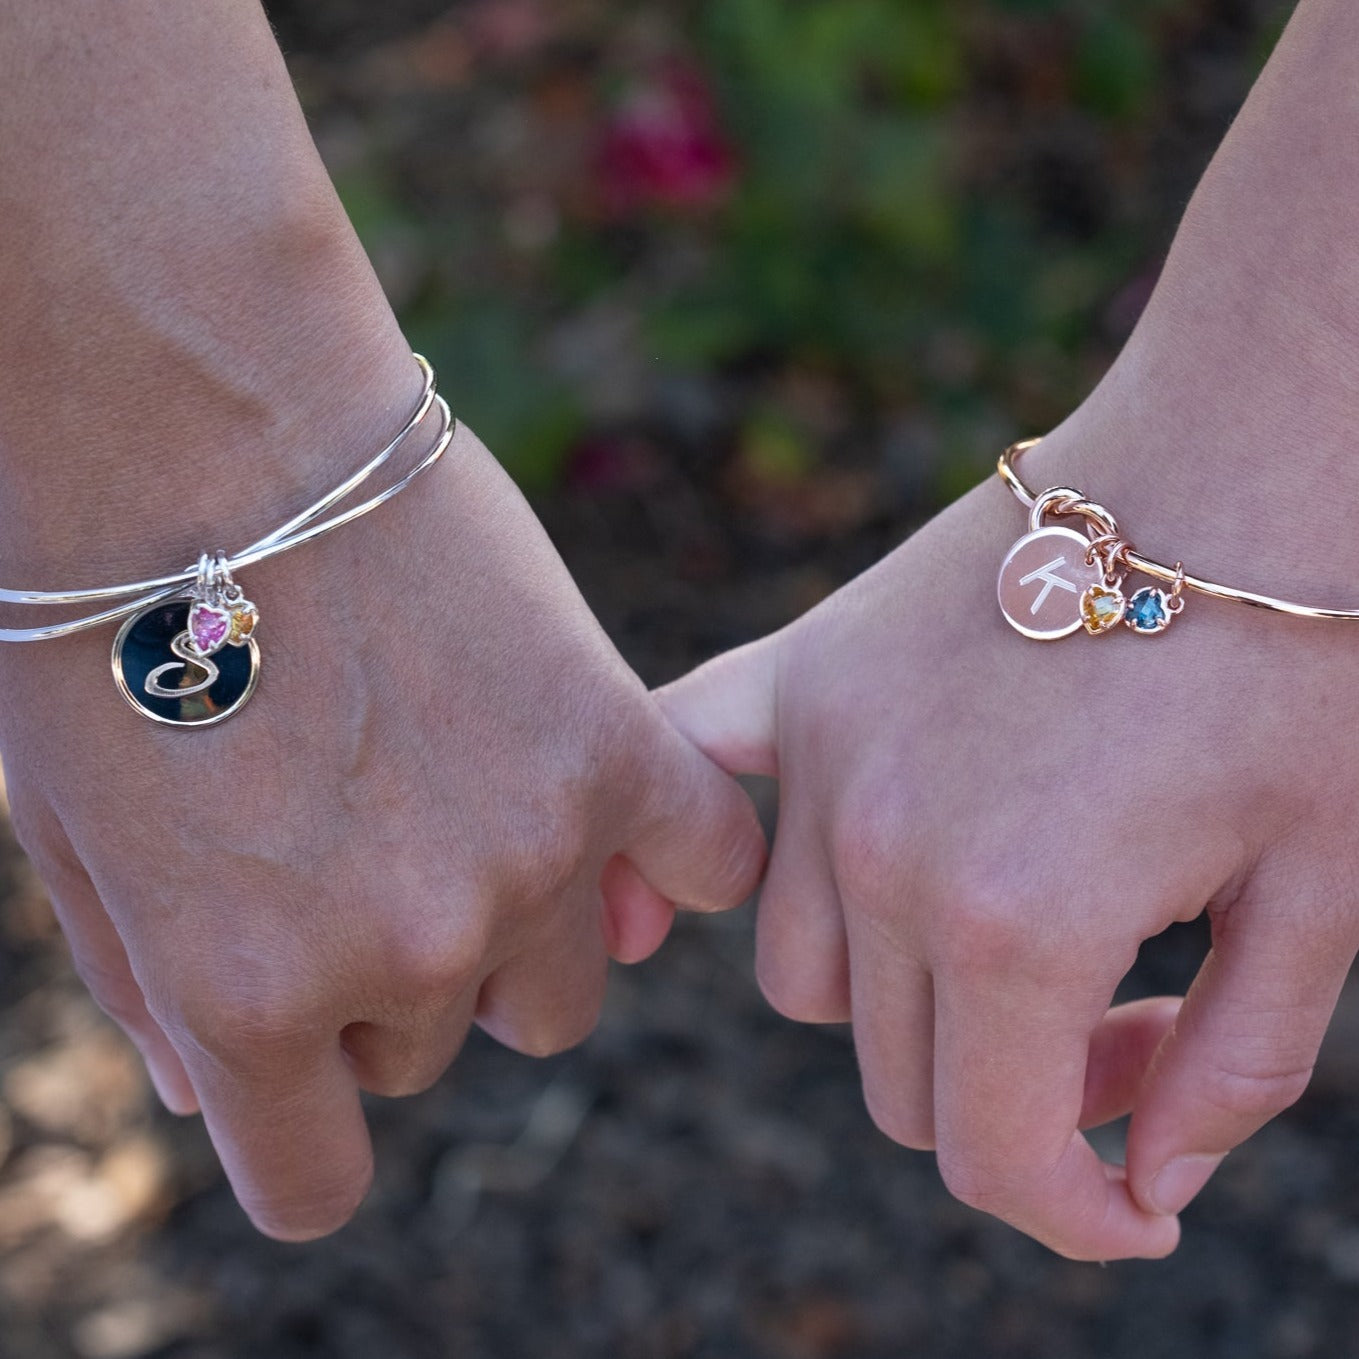 Silver Infinity Bracelet and Knot Rose Gold Bracelet make the perfect gift to celebrate your friendship.